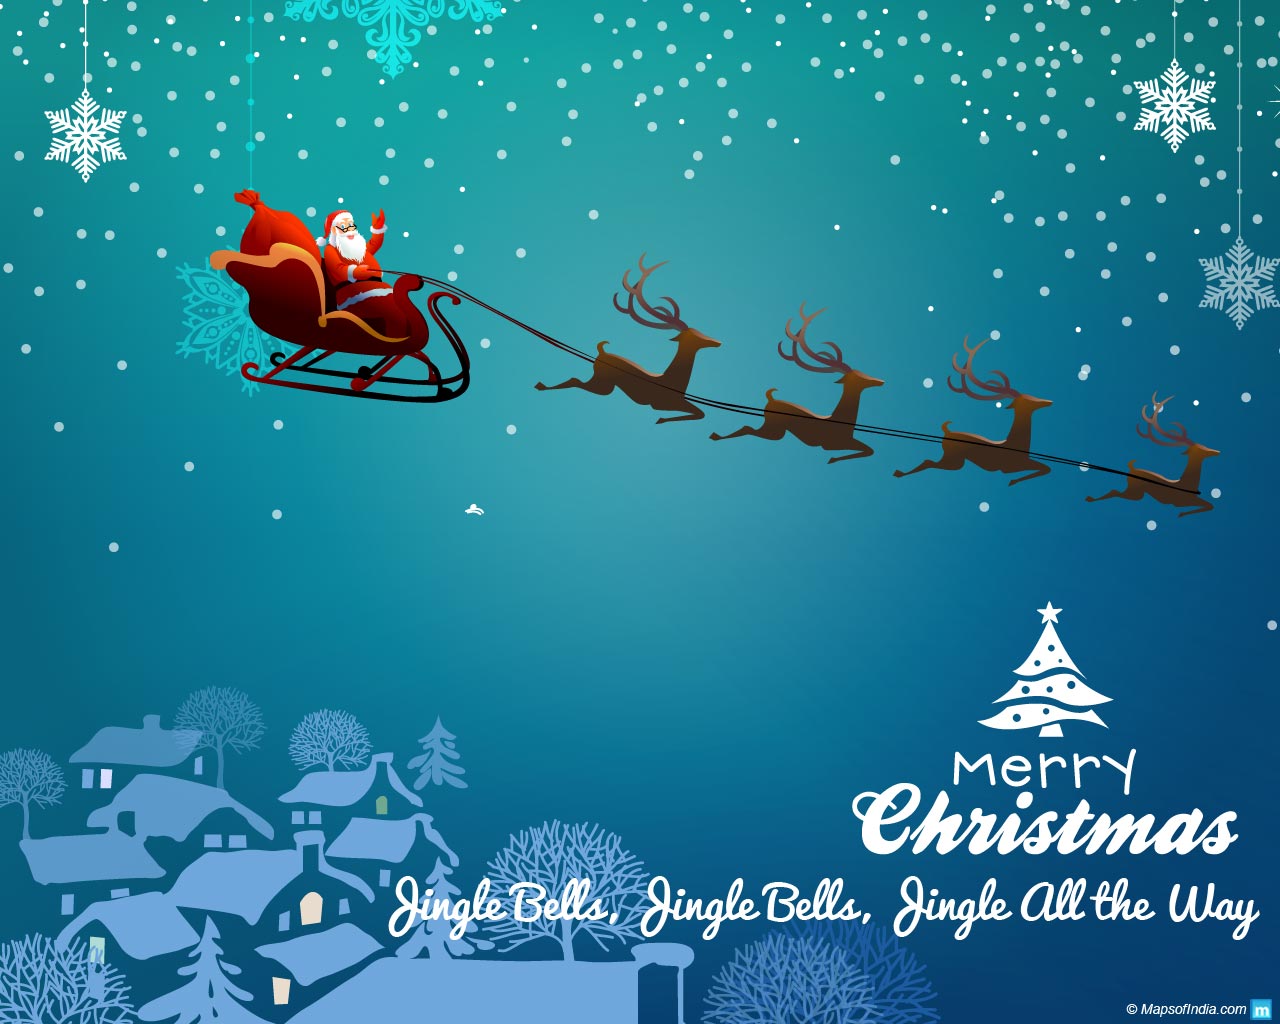 Christmas Wallpapers and Images 2016, Free Download Christmas Wallpapers